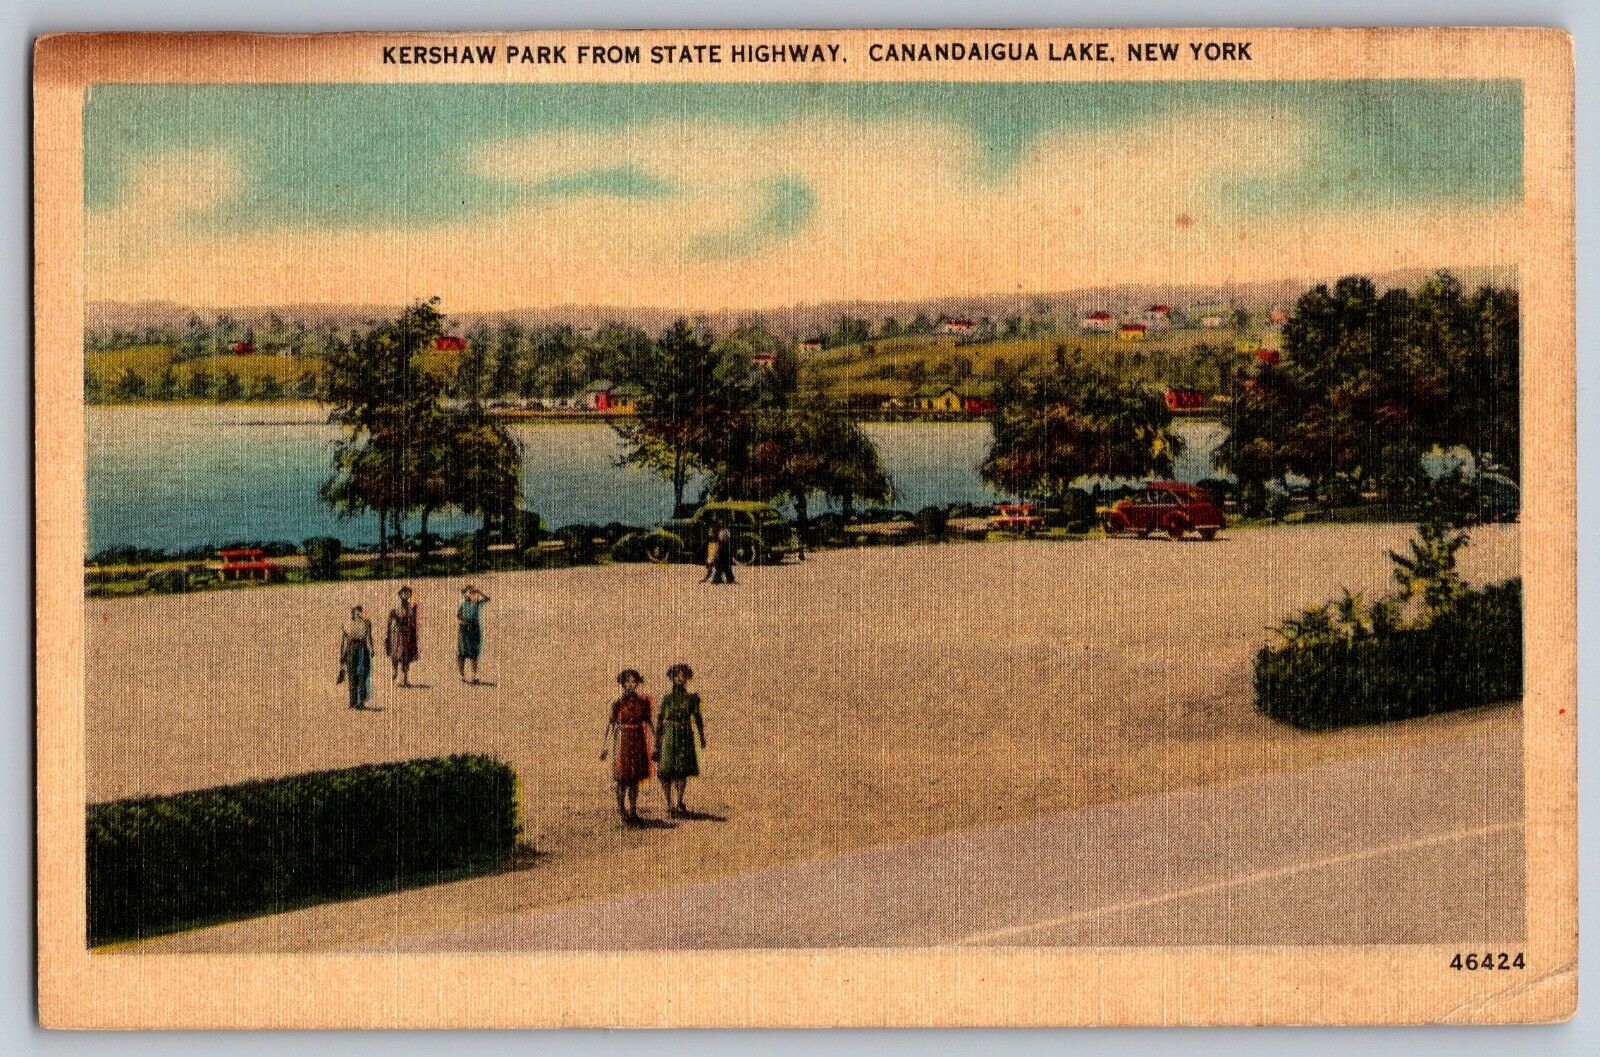 Canandaigua Lake, New York - Kershaw Park from State Highway - Vintage Postcard